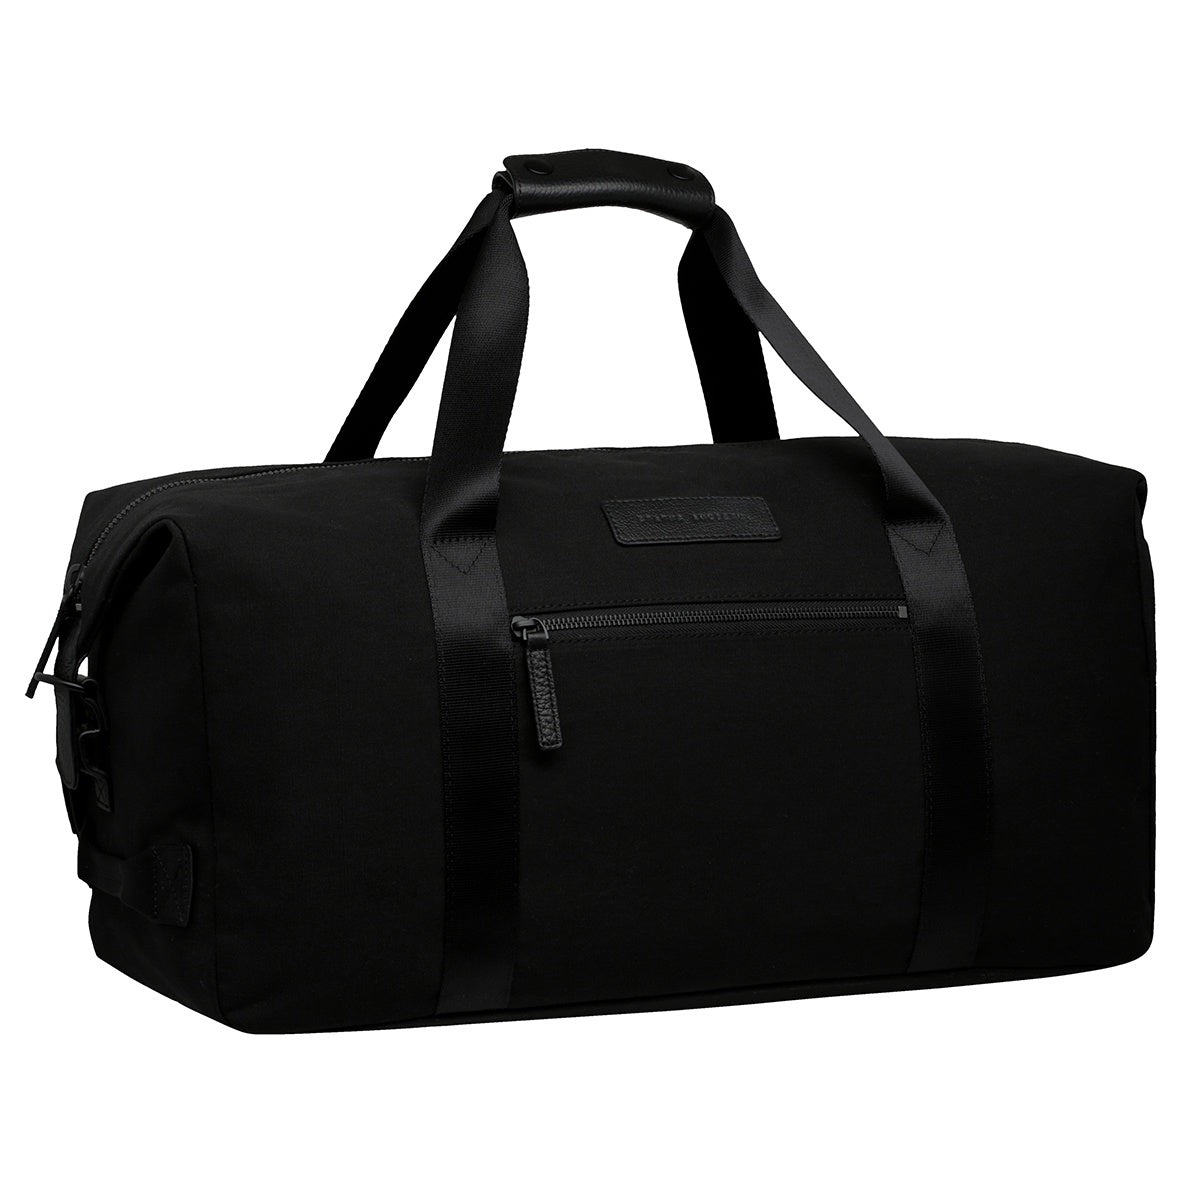 Status Anxiety everything I wanted duffle bag canvas black